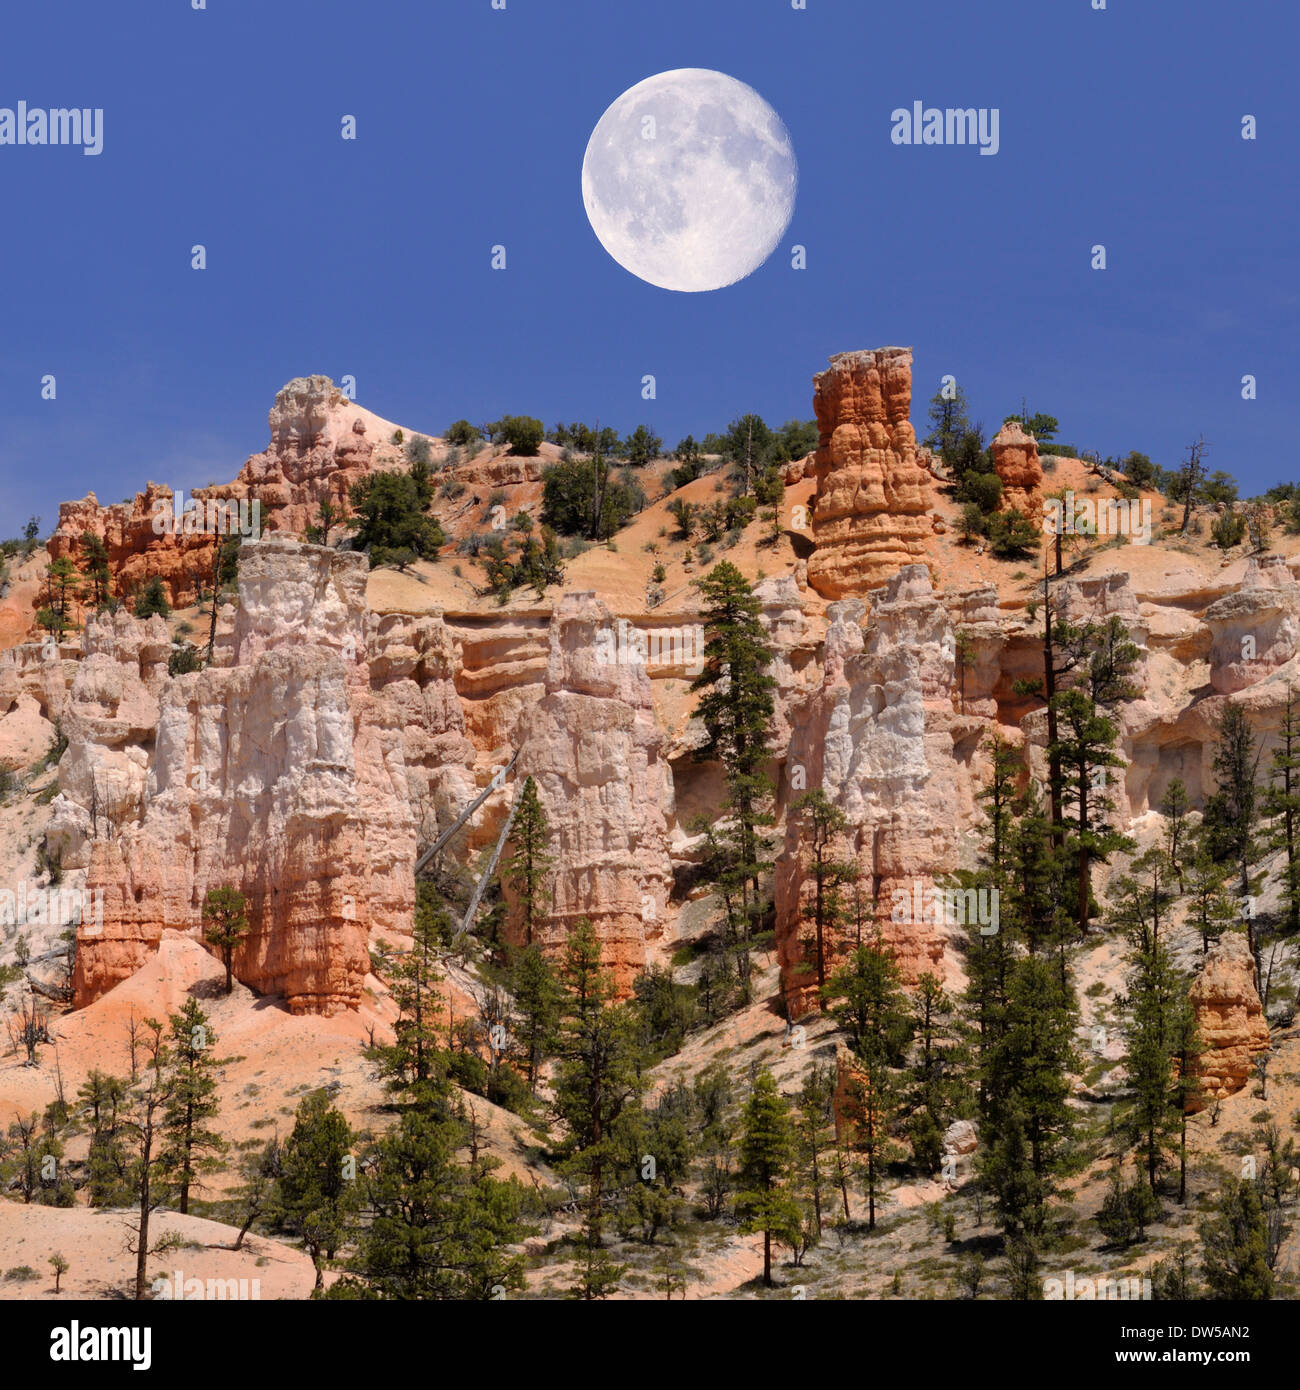 full moon over breathtaking view of oddly shaped hoodoos and rock spires at iconic, world-famous Bryce Canyon in southern Utah, USA Stock Photo